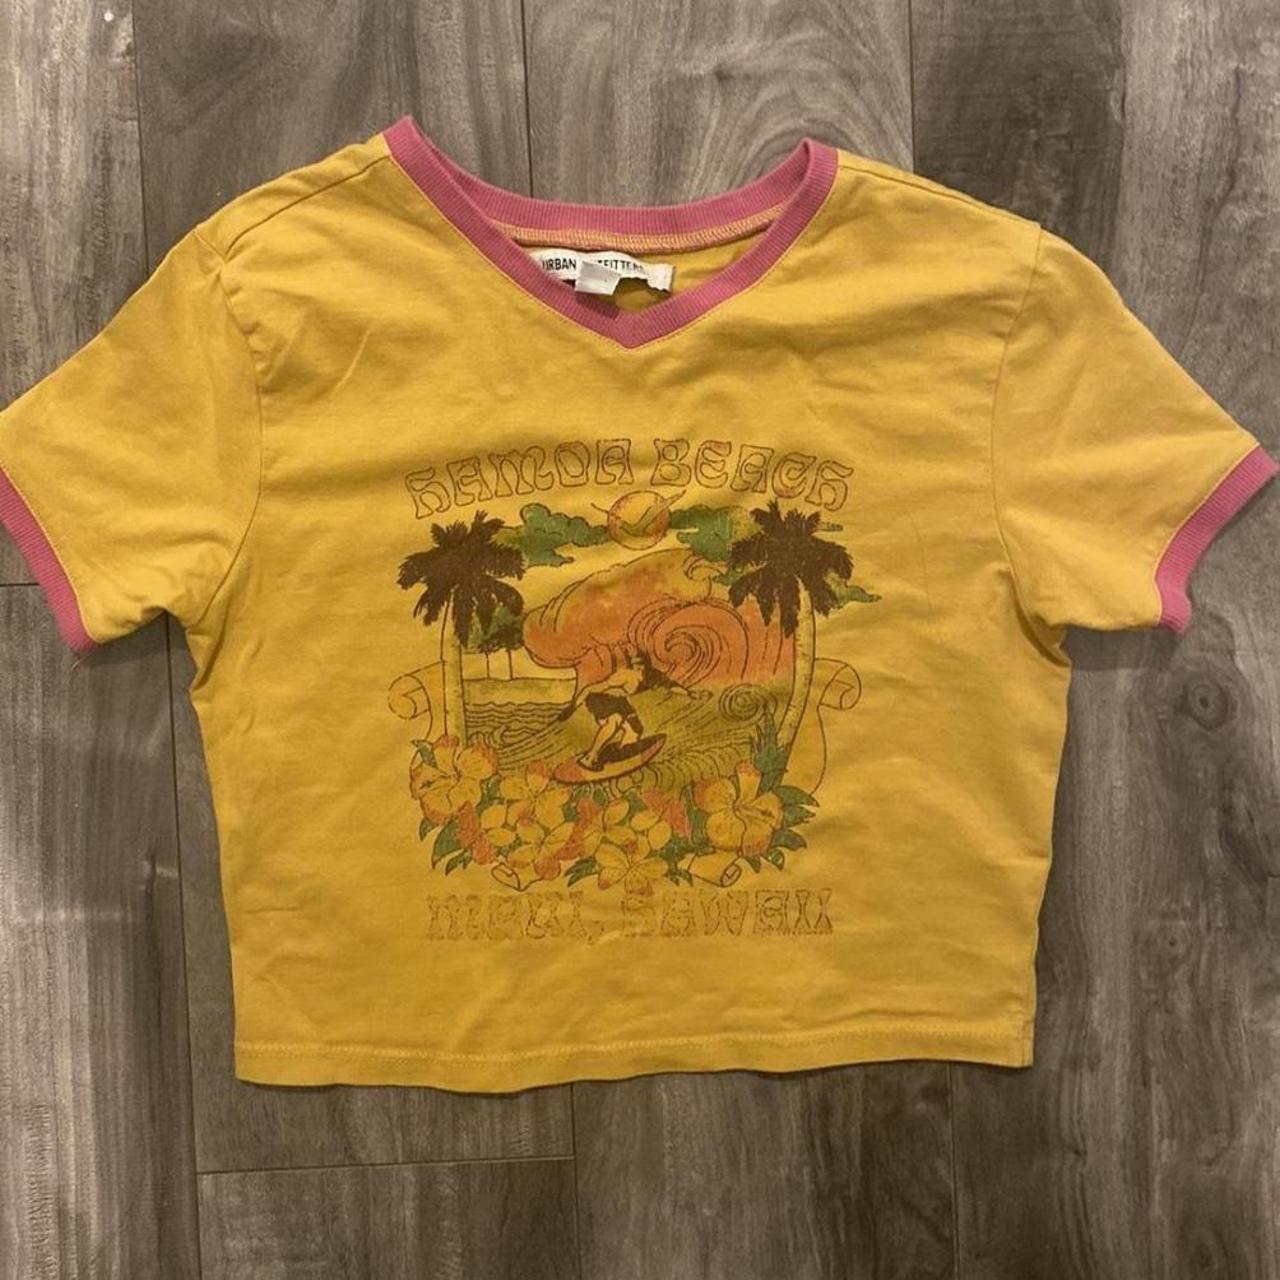 Urban Outfitters Women's Yellow and Pink Shirt